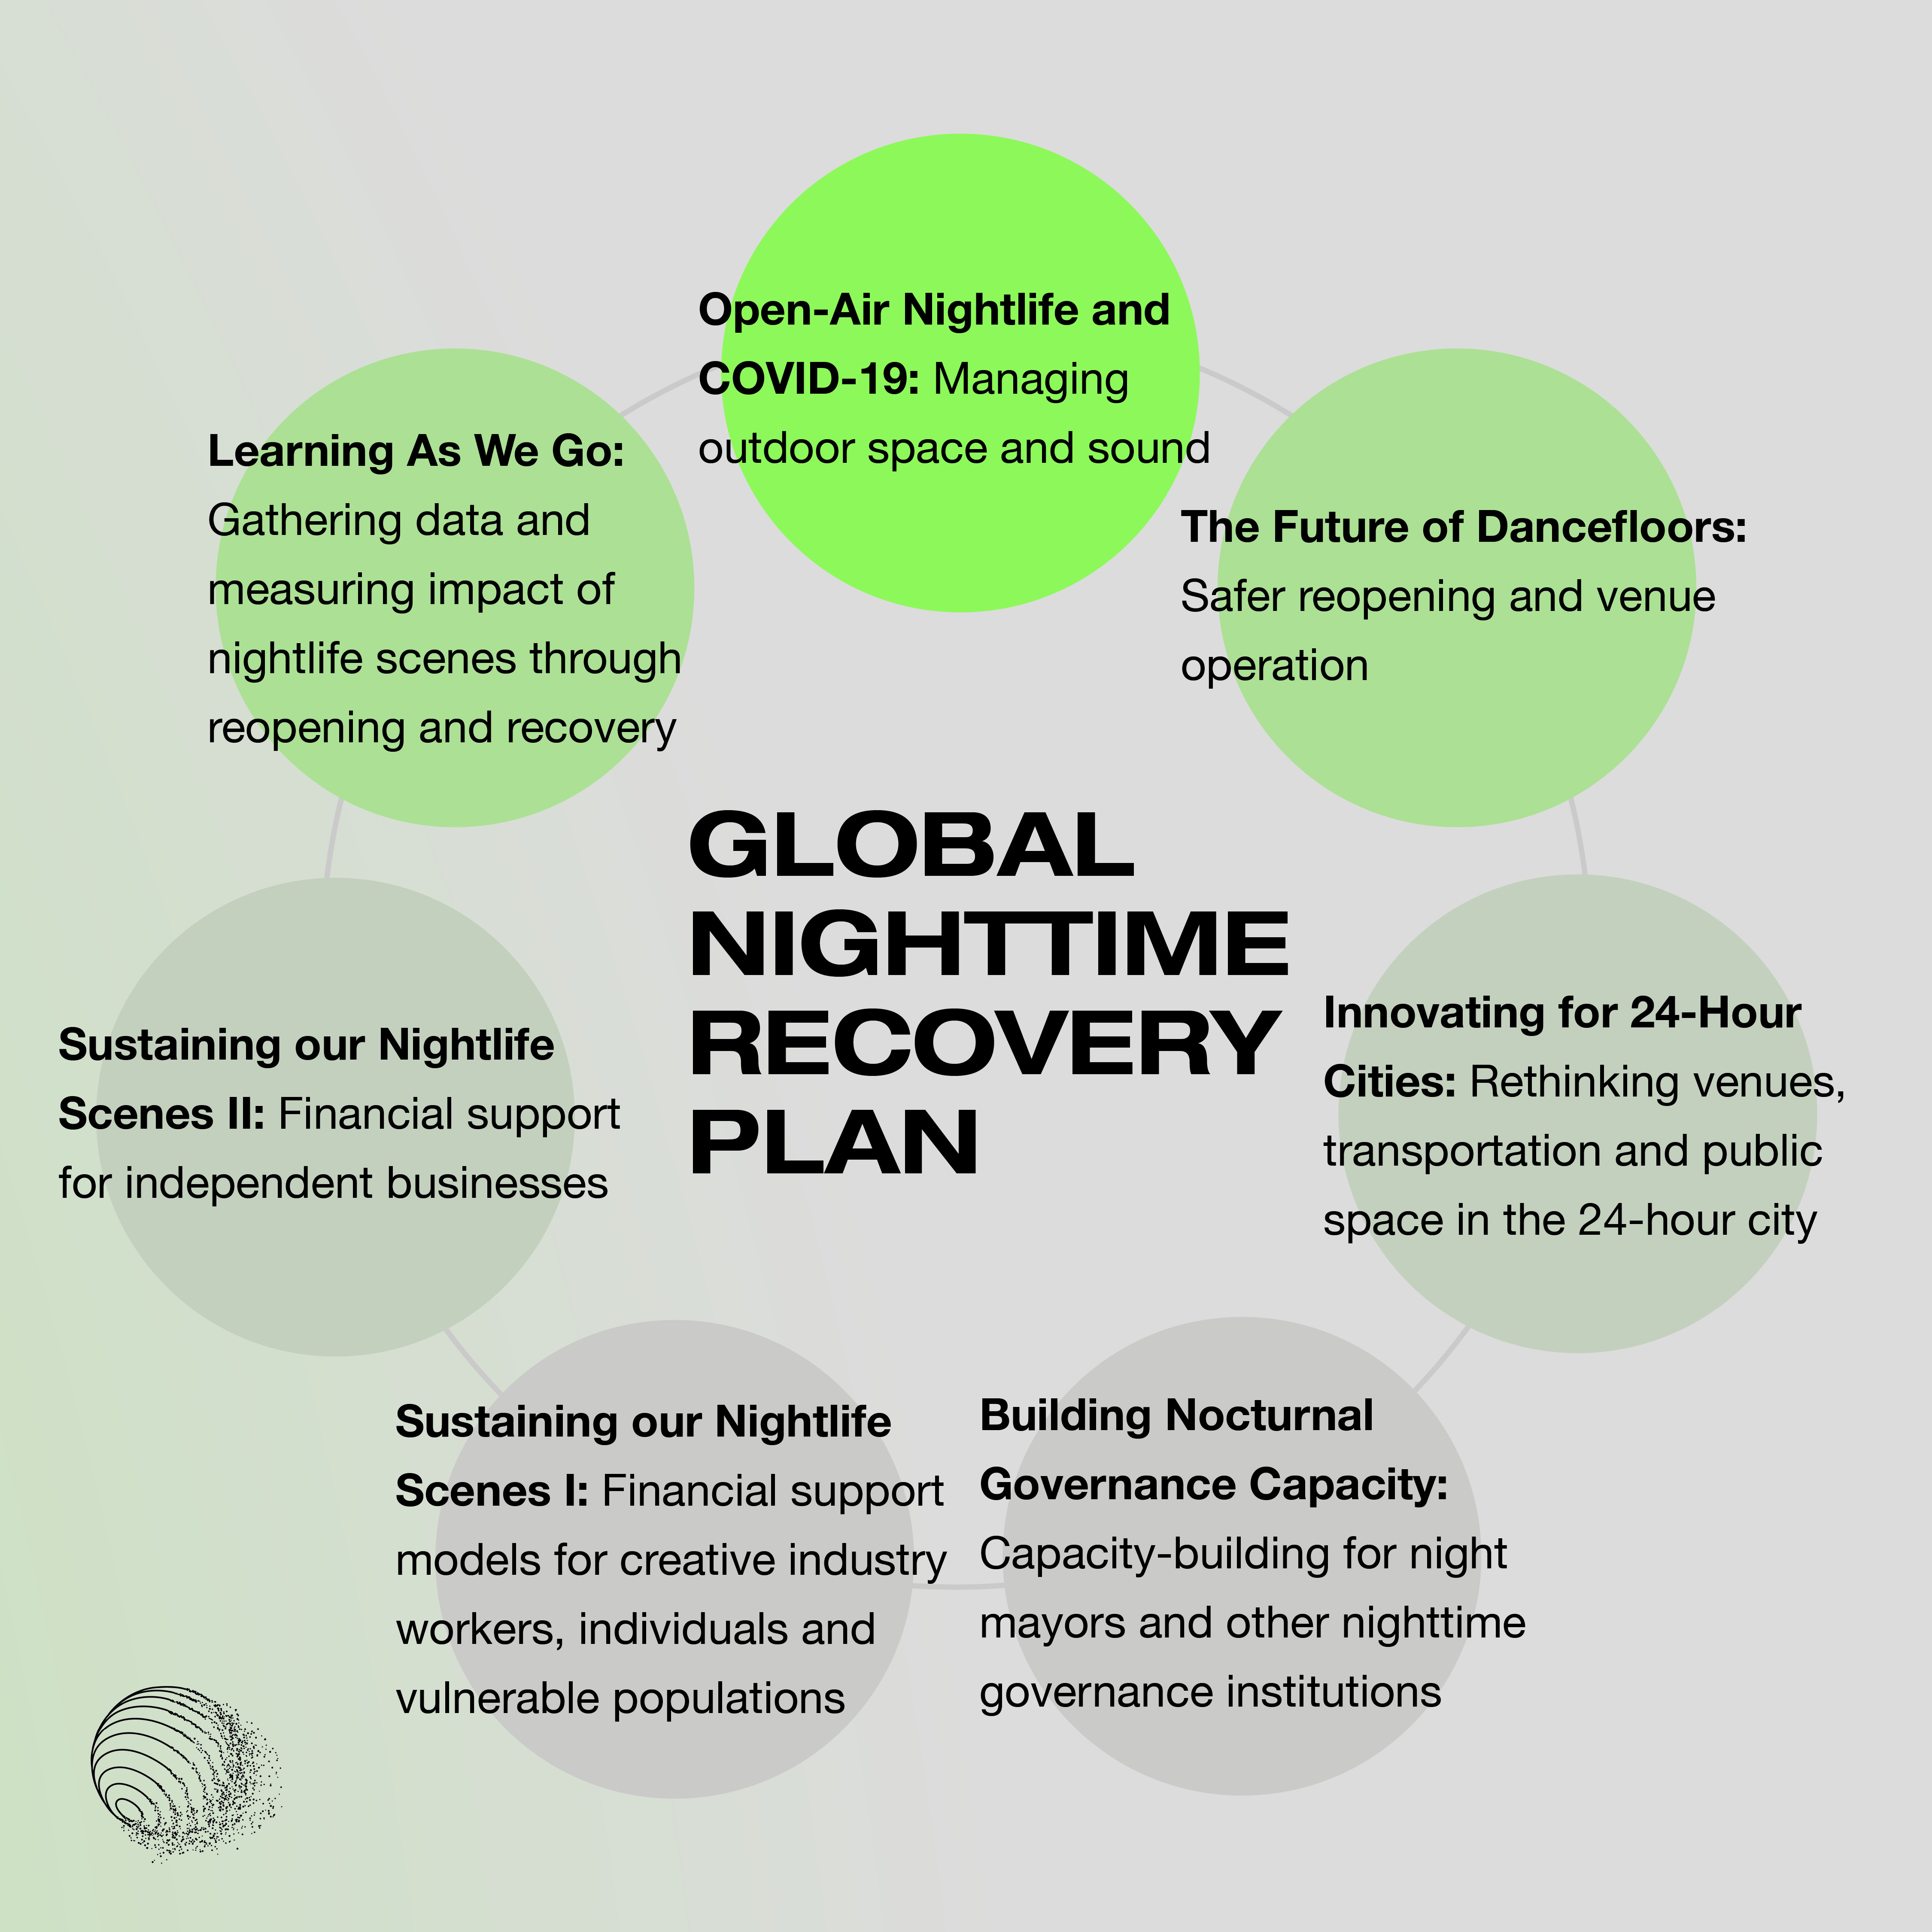 Global Nighttime Recovery Plan: Open-Air Nightlife and Covid-19, The Future of Dancefloors, Innovating for 24-hour cities, Building Nocturnal Governance Capacity, Sustaining our Nightlife Scenes I and II, Learning As We Go.